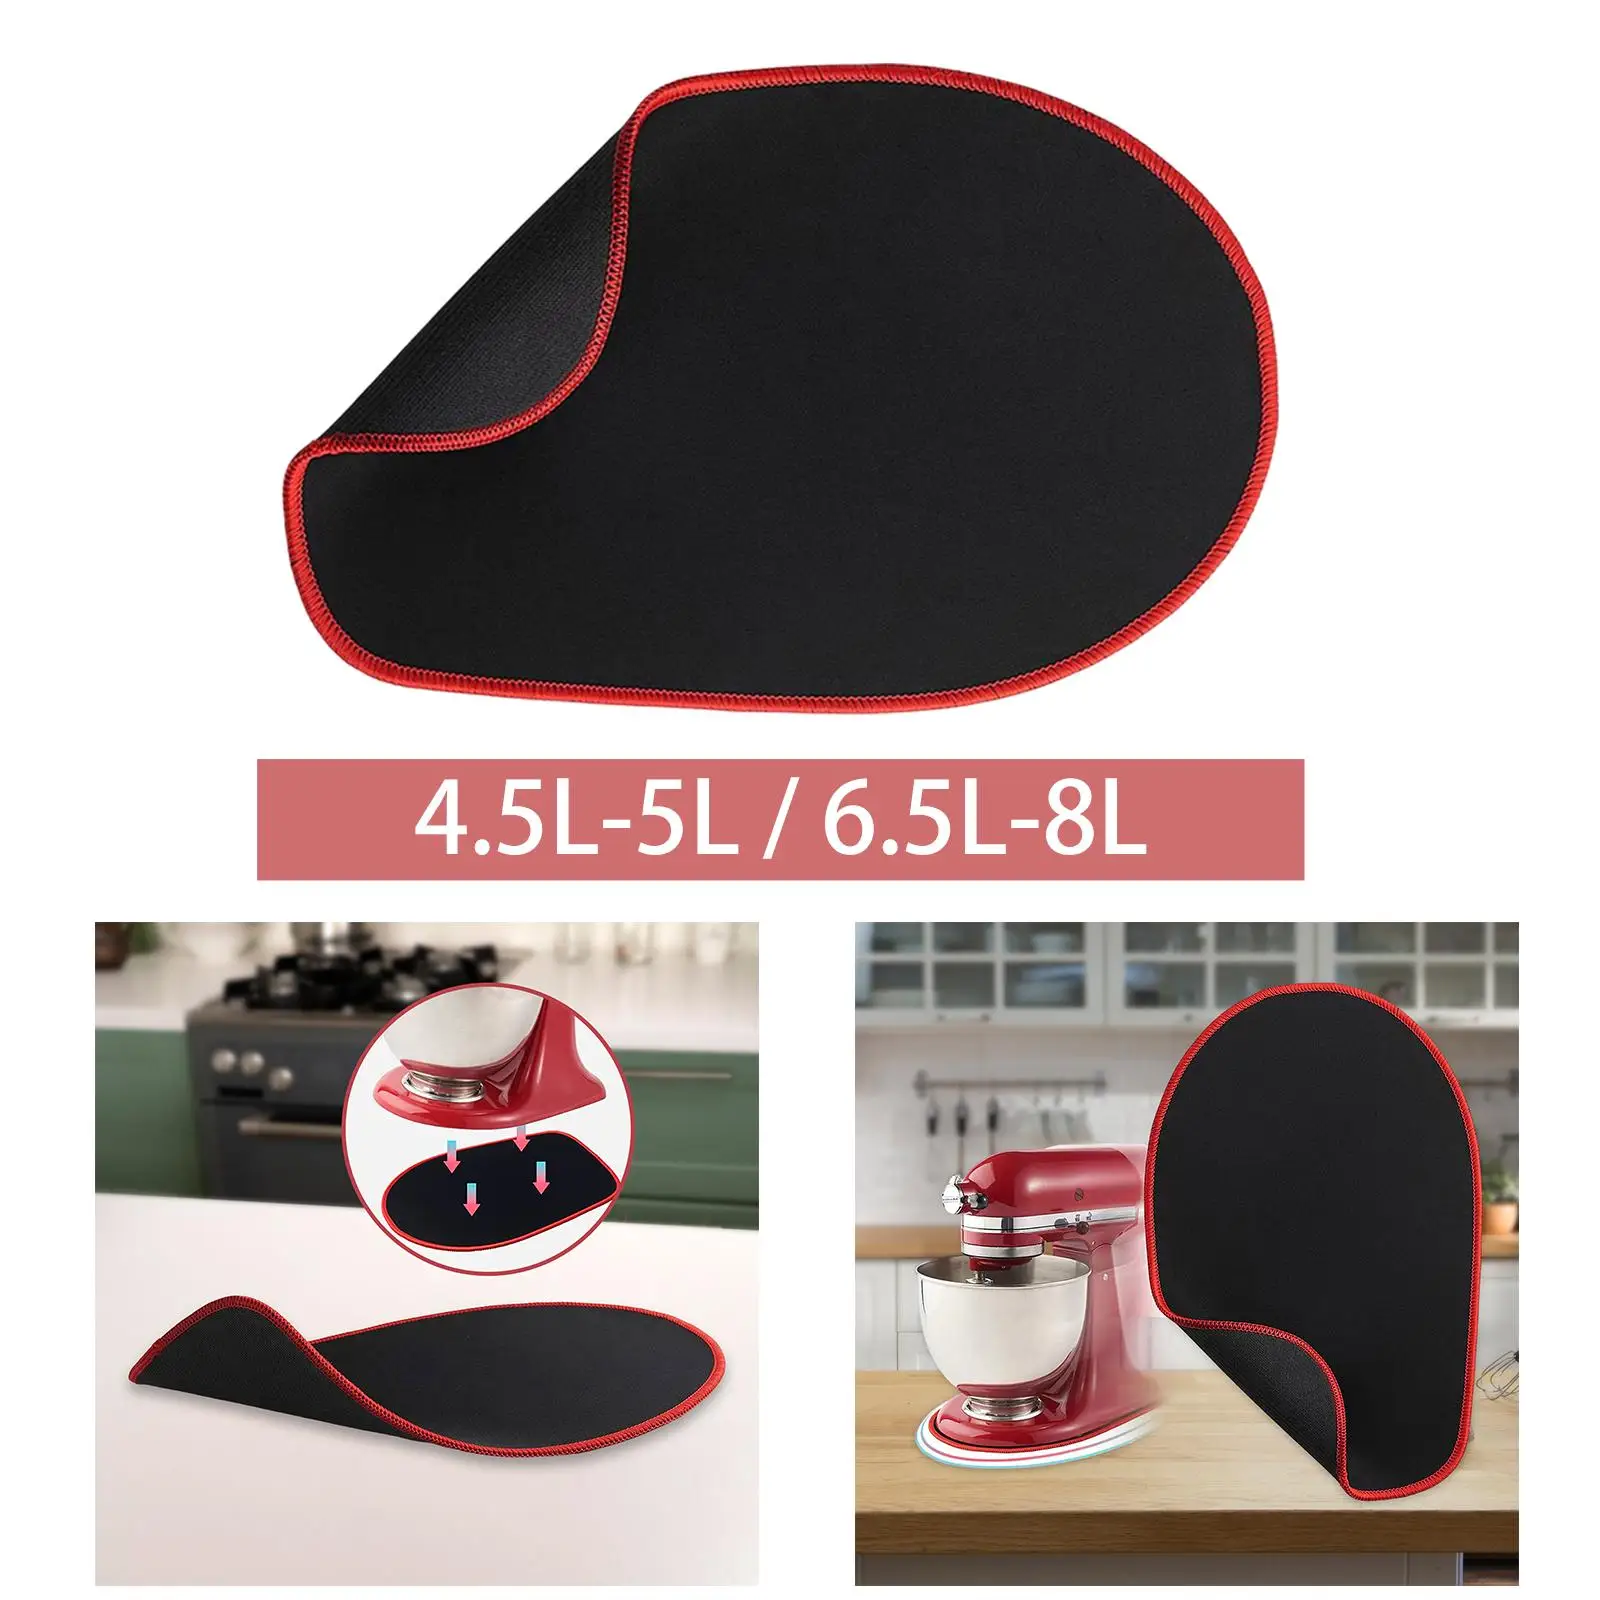 Mover Moving Matting Kitchen Accessories Appliances Slider Mixer Mat for Countertop